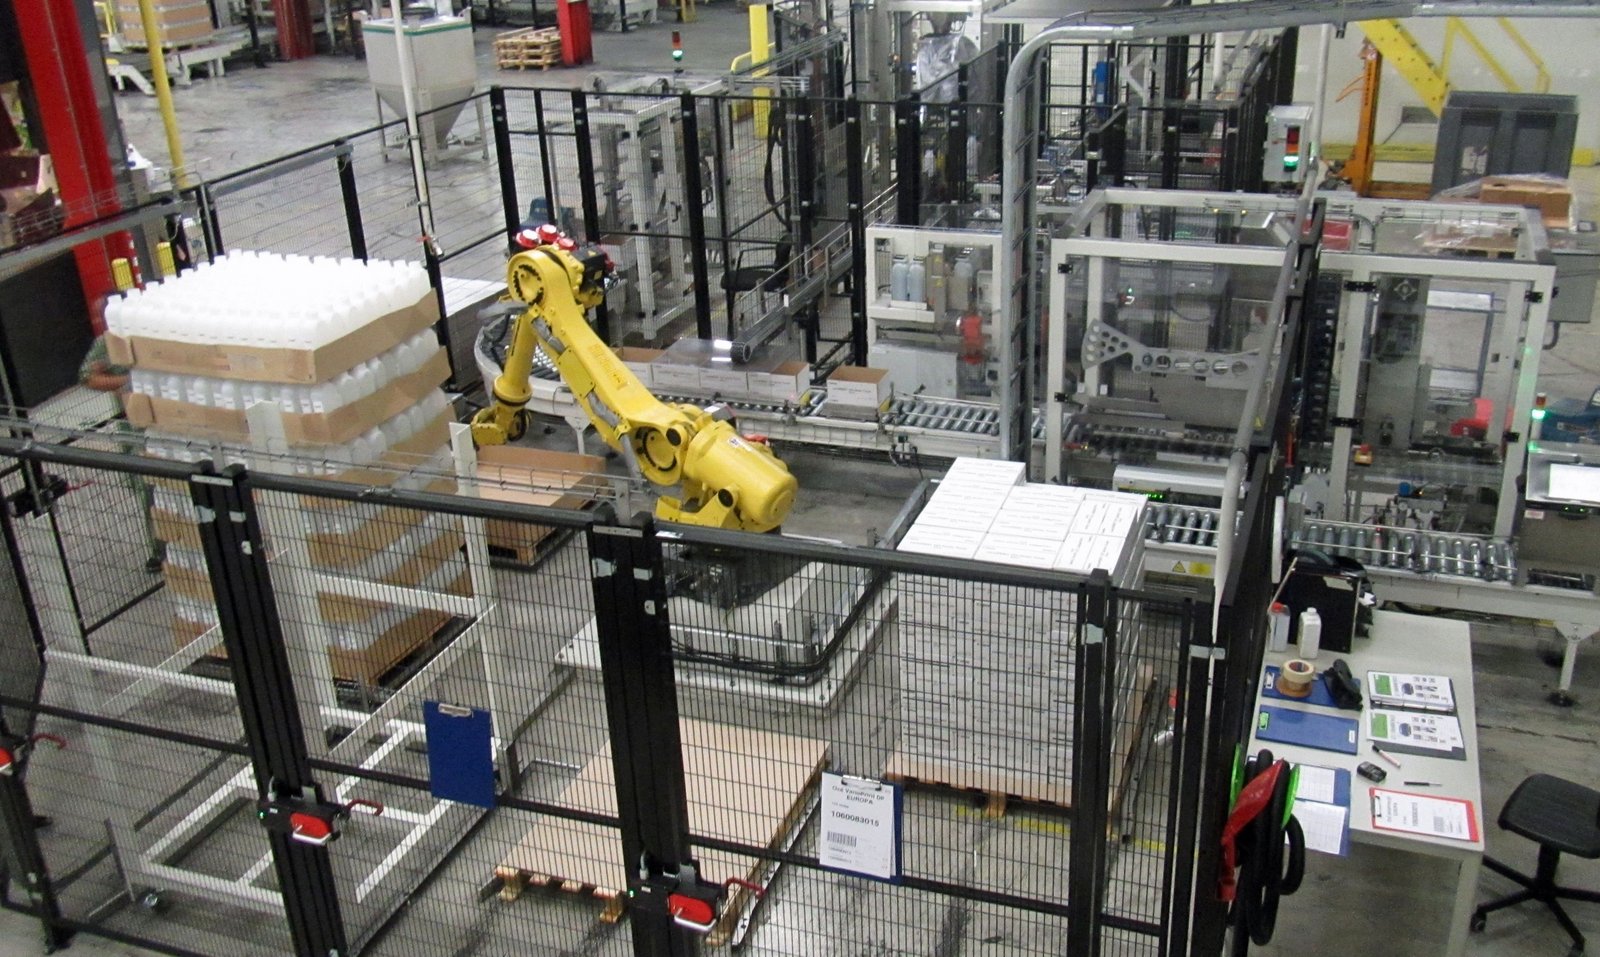 robertpack-has-more-than-45-years-of-practical-experience-in-designing-and-maintaining-robot-packing-lines